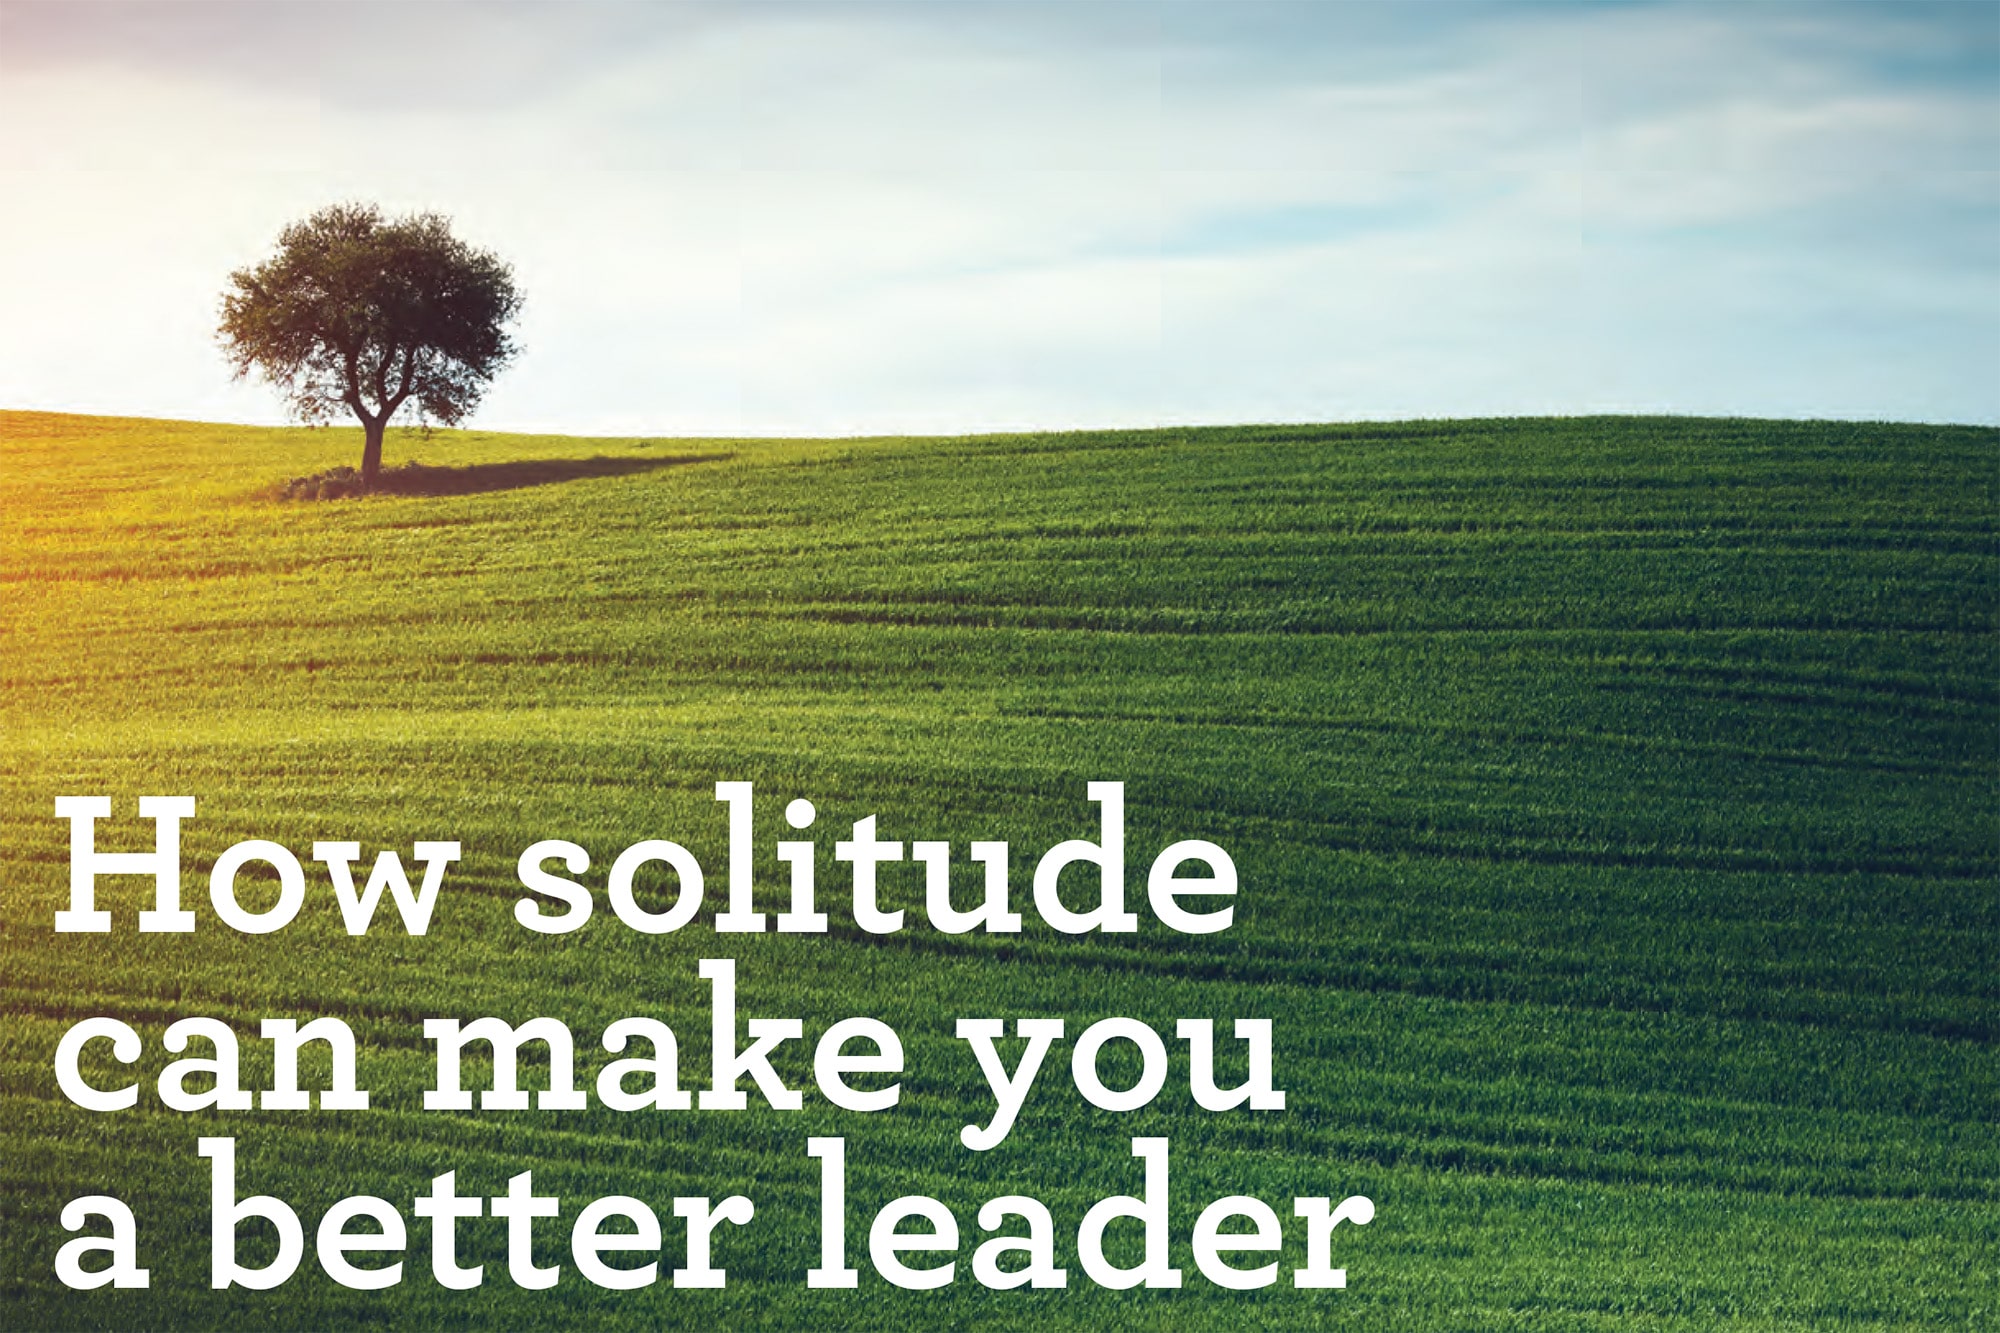 How solitude can make you a better leader.